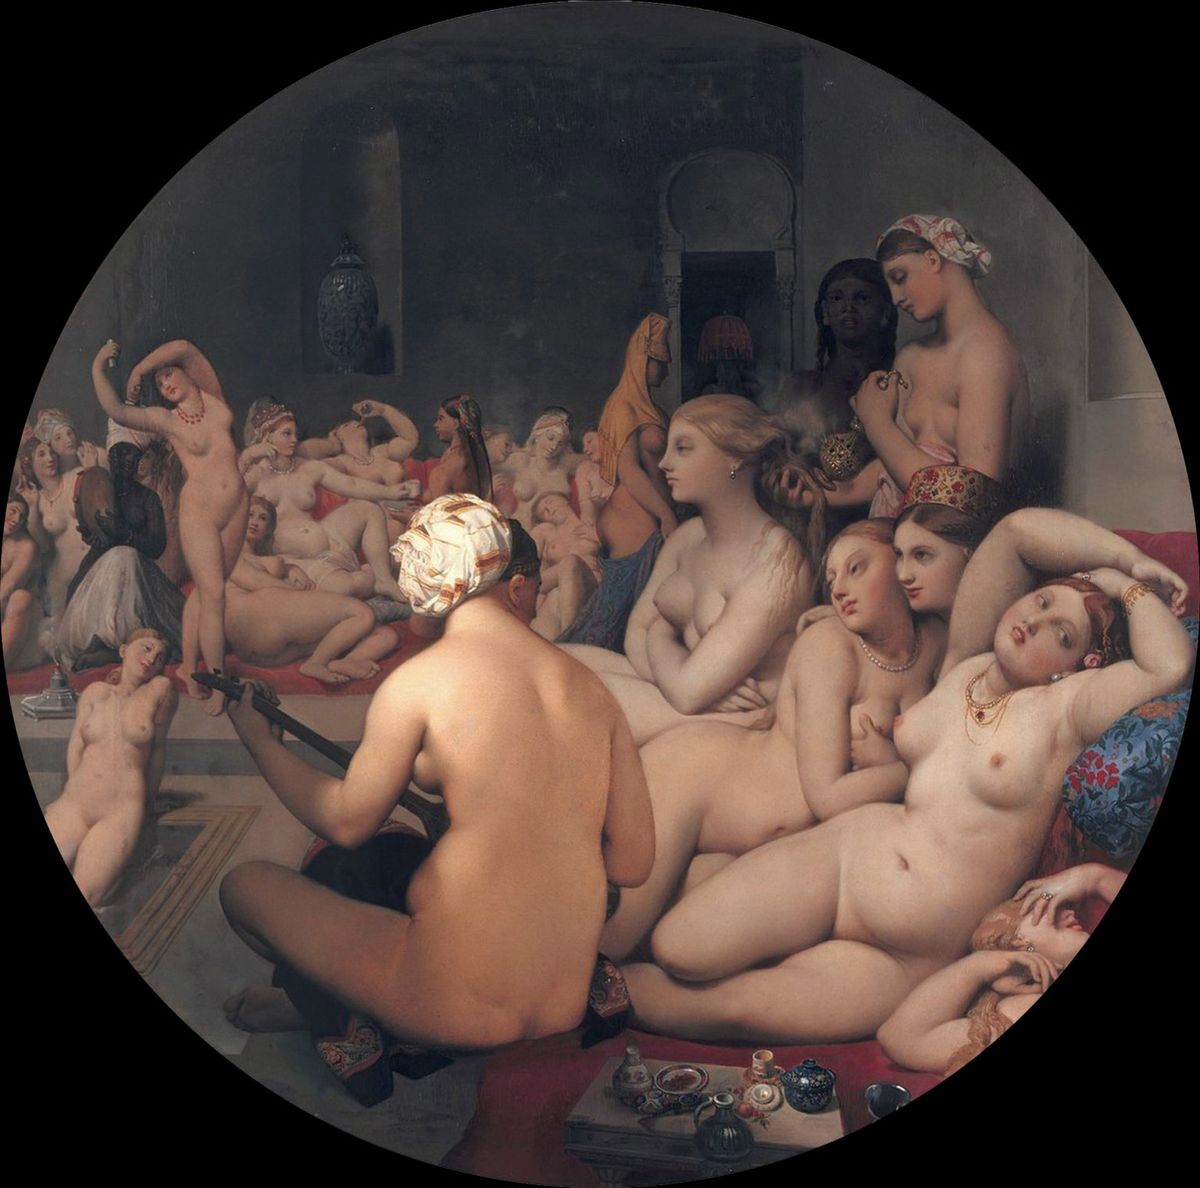 Ingres's The Turkish Bath (1852-1859) at the Louvre Museum is among the works Pornhub has highlighted on its Classic Nudes tour 